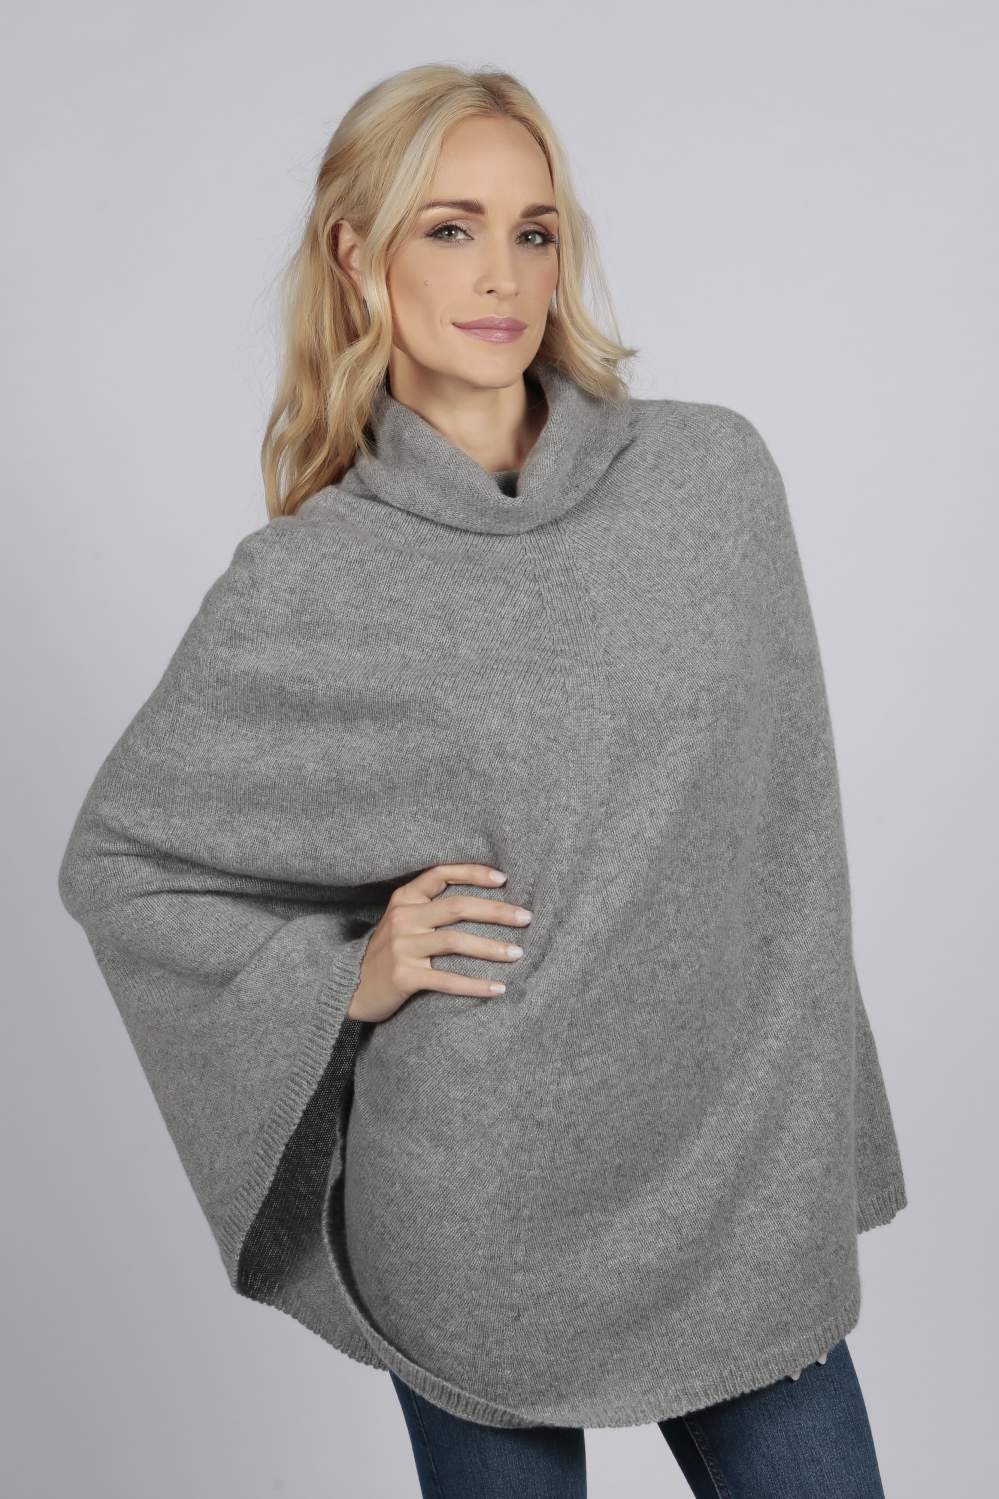 FREE UK Shipping, CASHMERE Poncho  BROWN CAPE Wrap One Size Fits All 